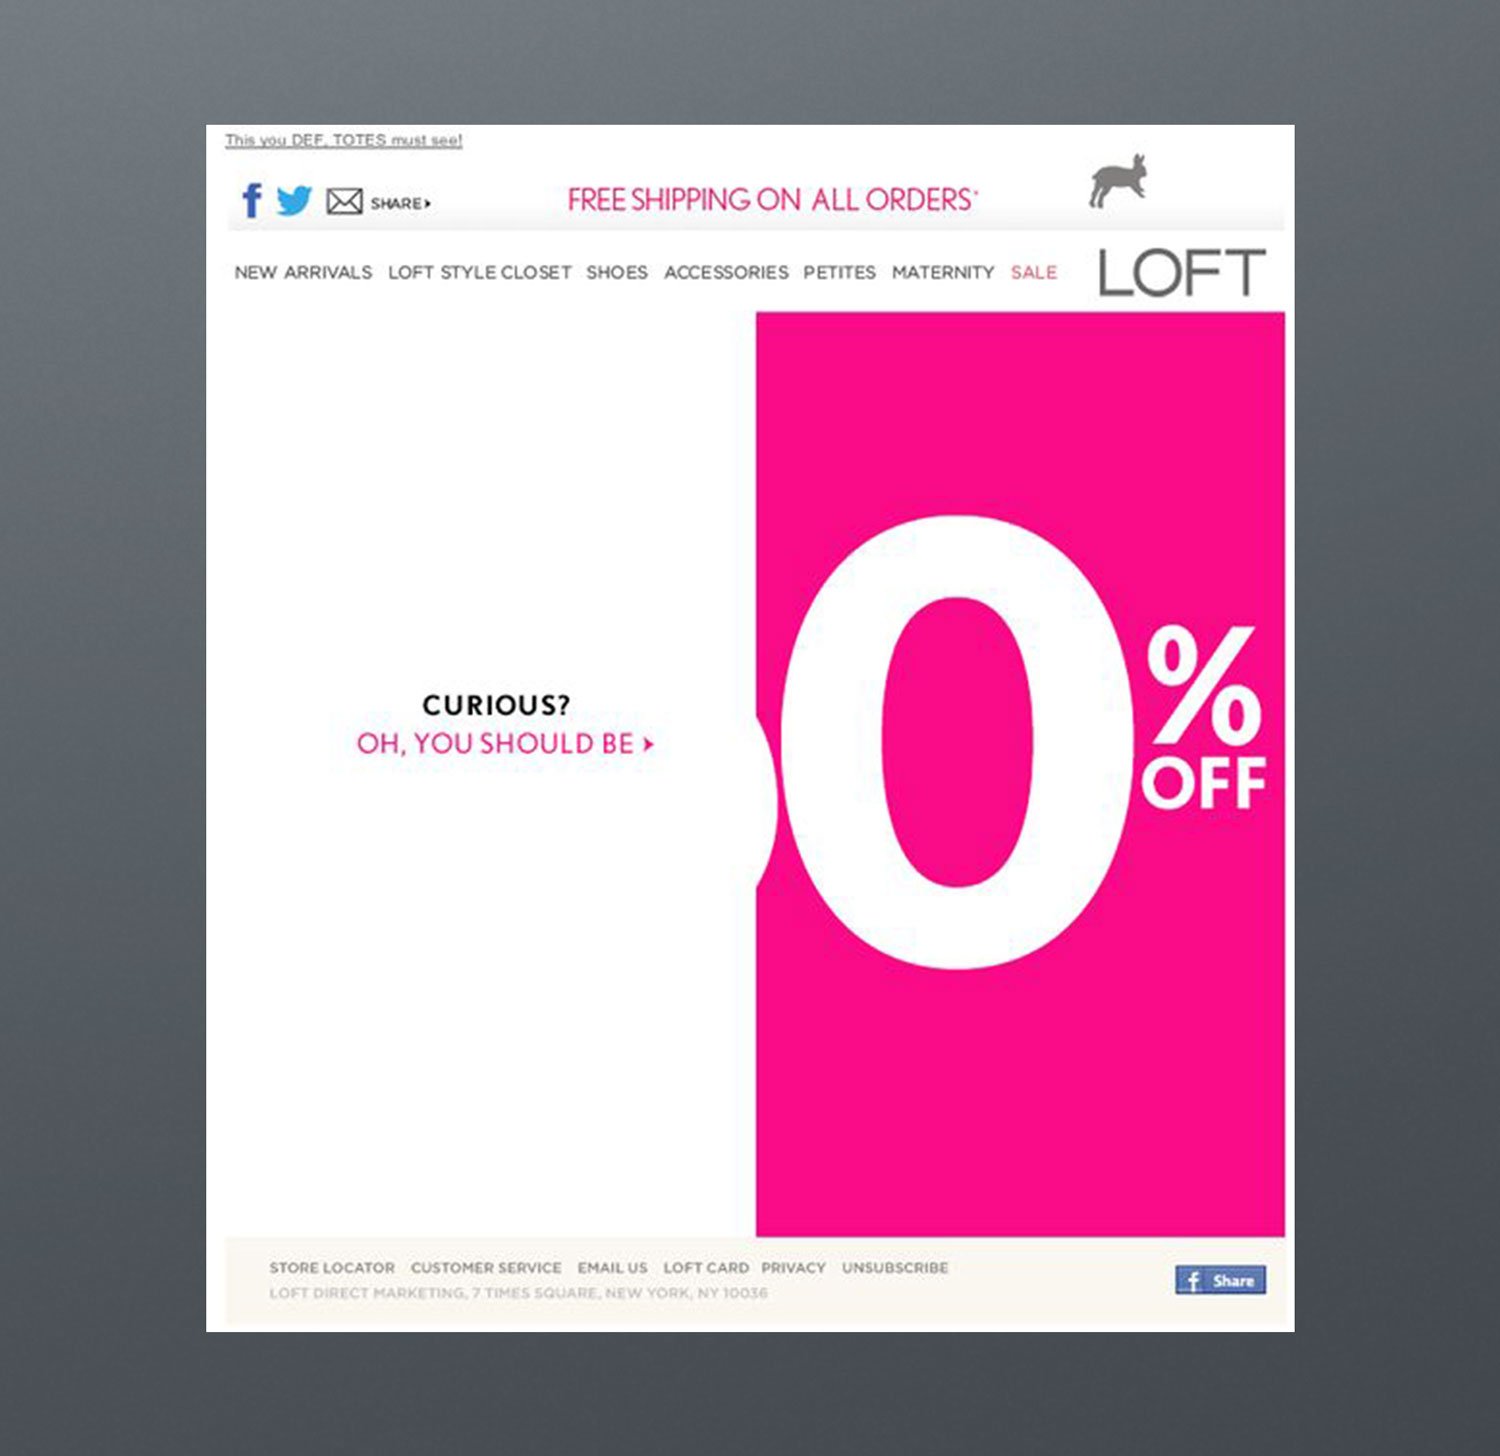 Email Newsltter Campaign 2 by loft